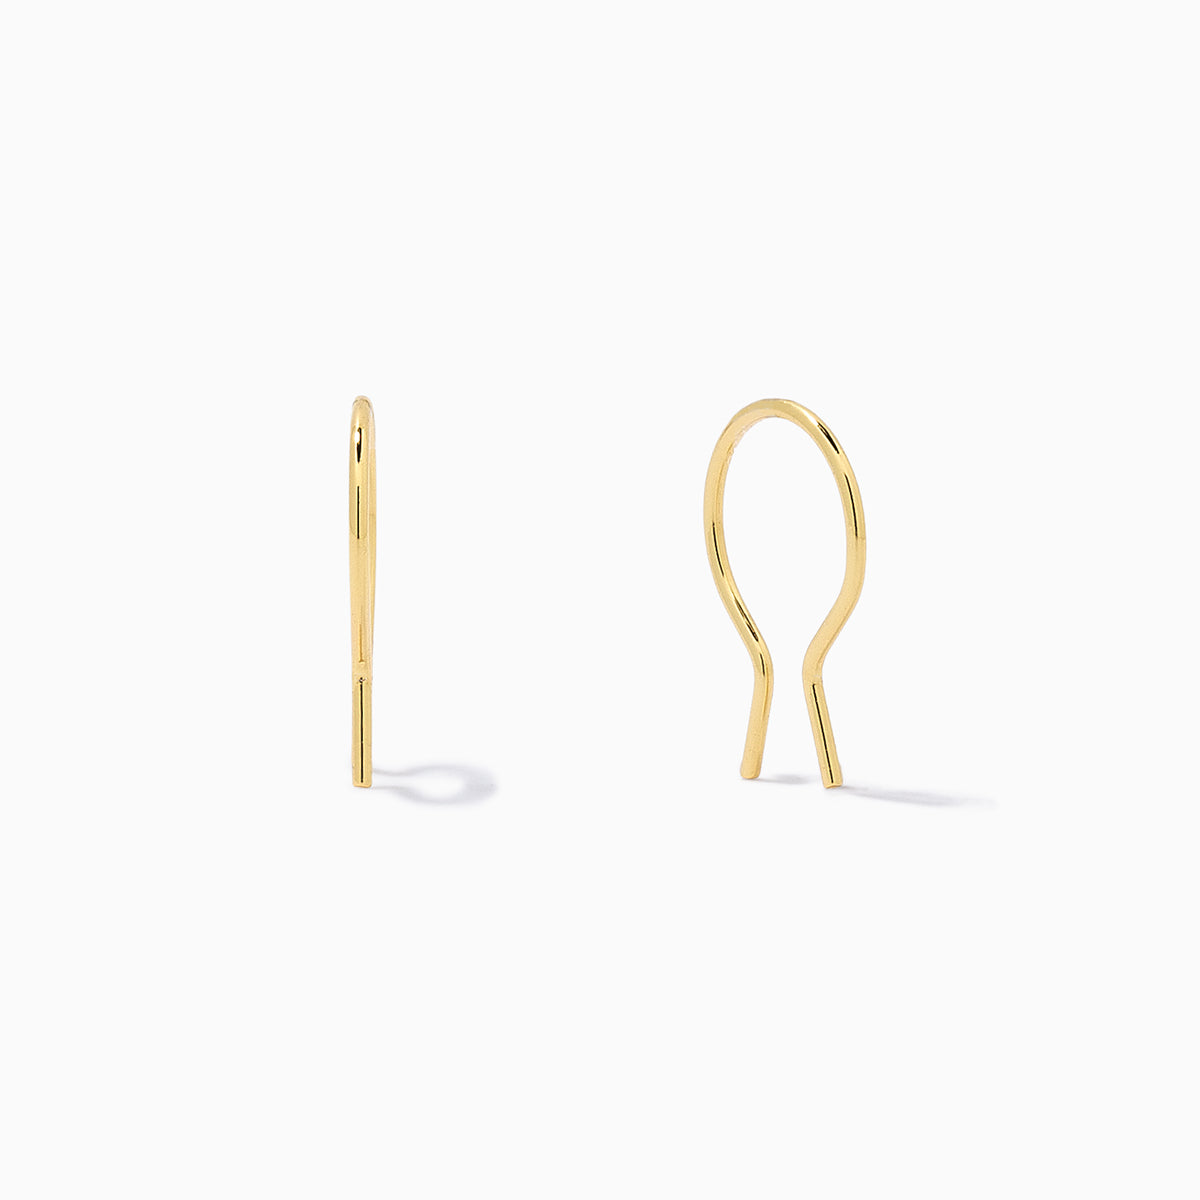 Sweet Escape Earrings | Gold | Product Image | Uncommon James